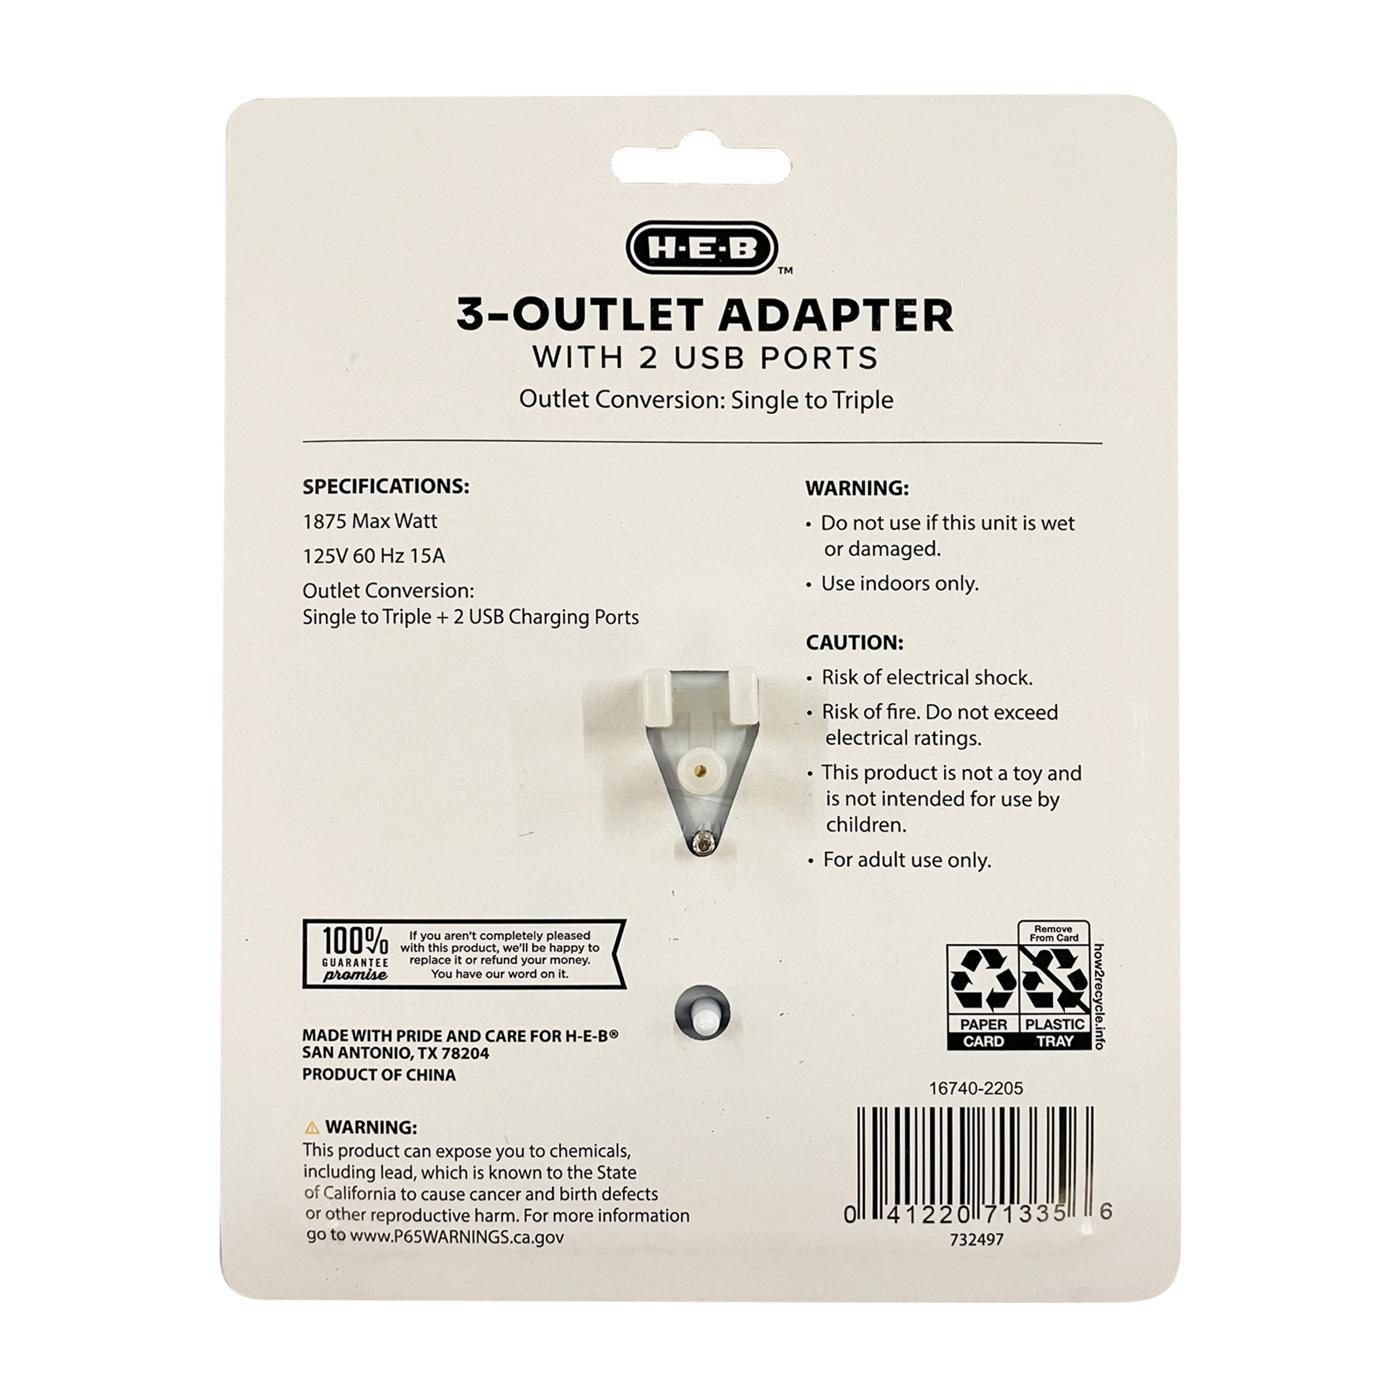 H-E-B 3-Outlet and USB Port Adapter; image 2 of 2